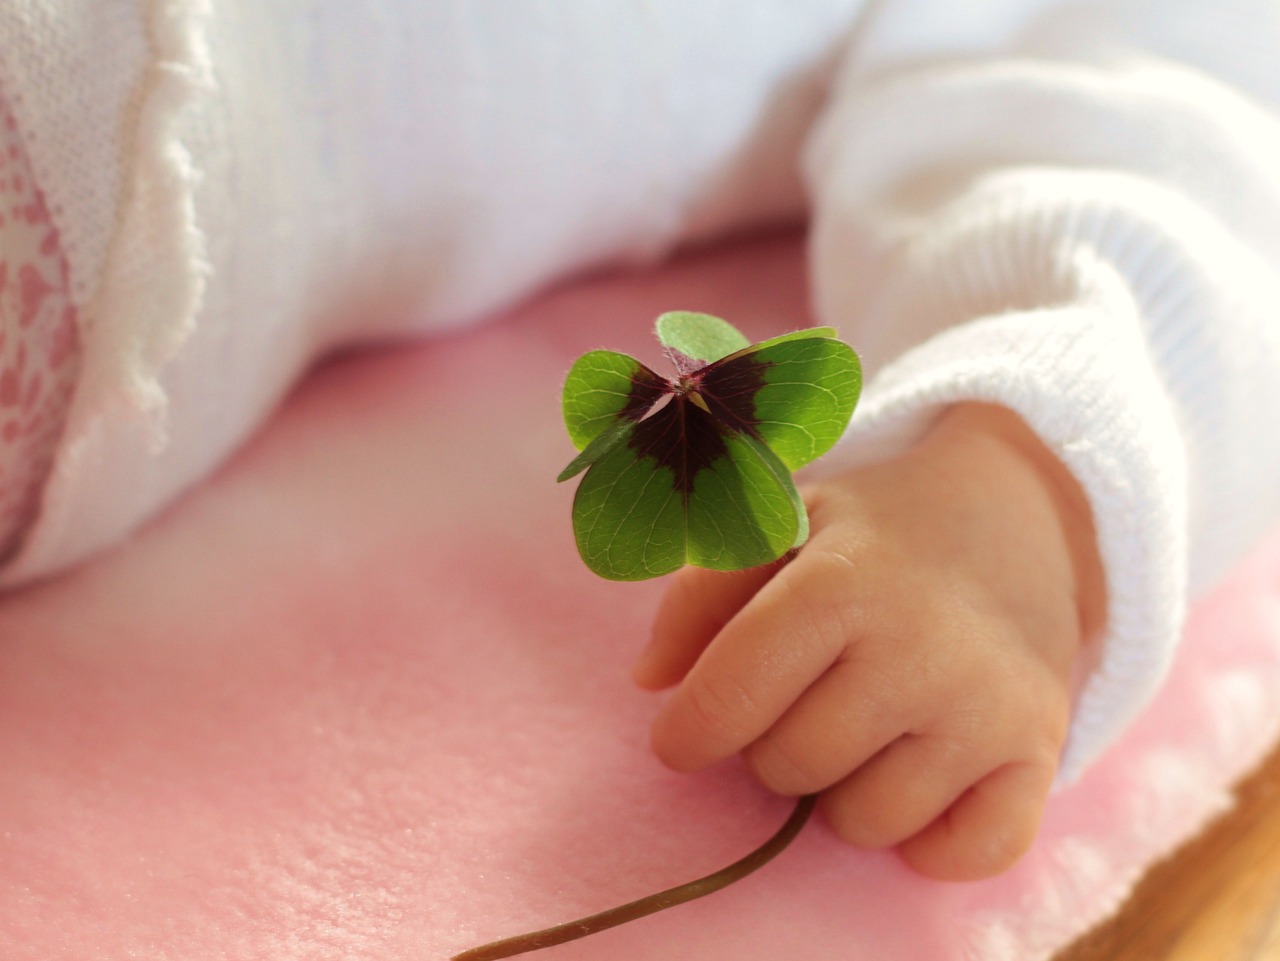 A baby holding a four-leaf clover in its hand.